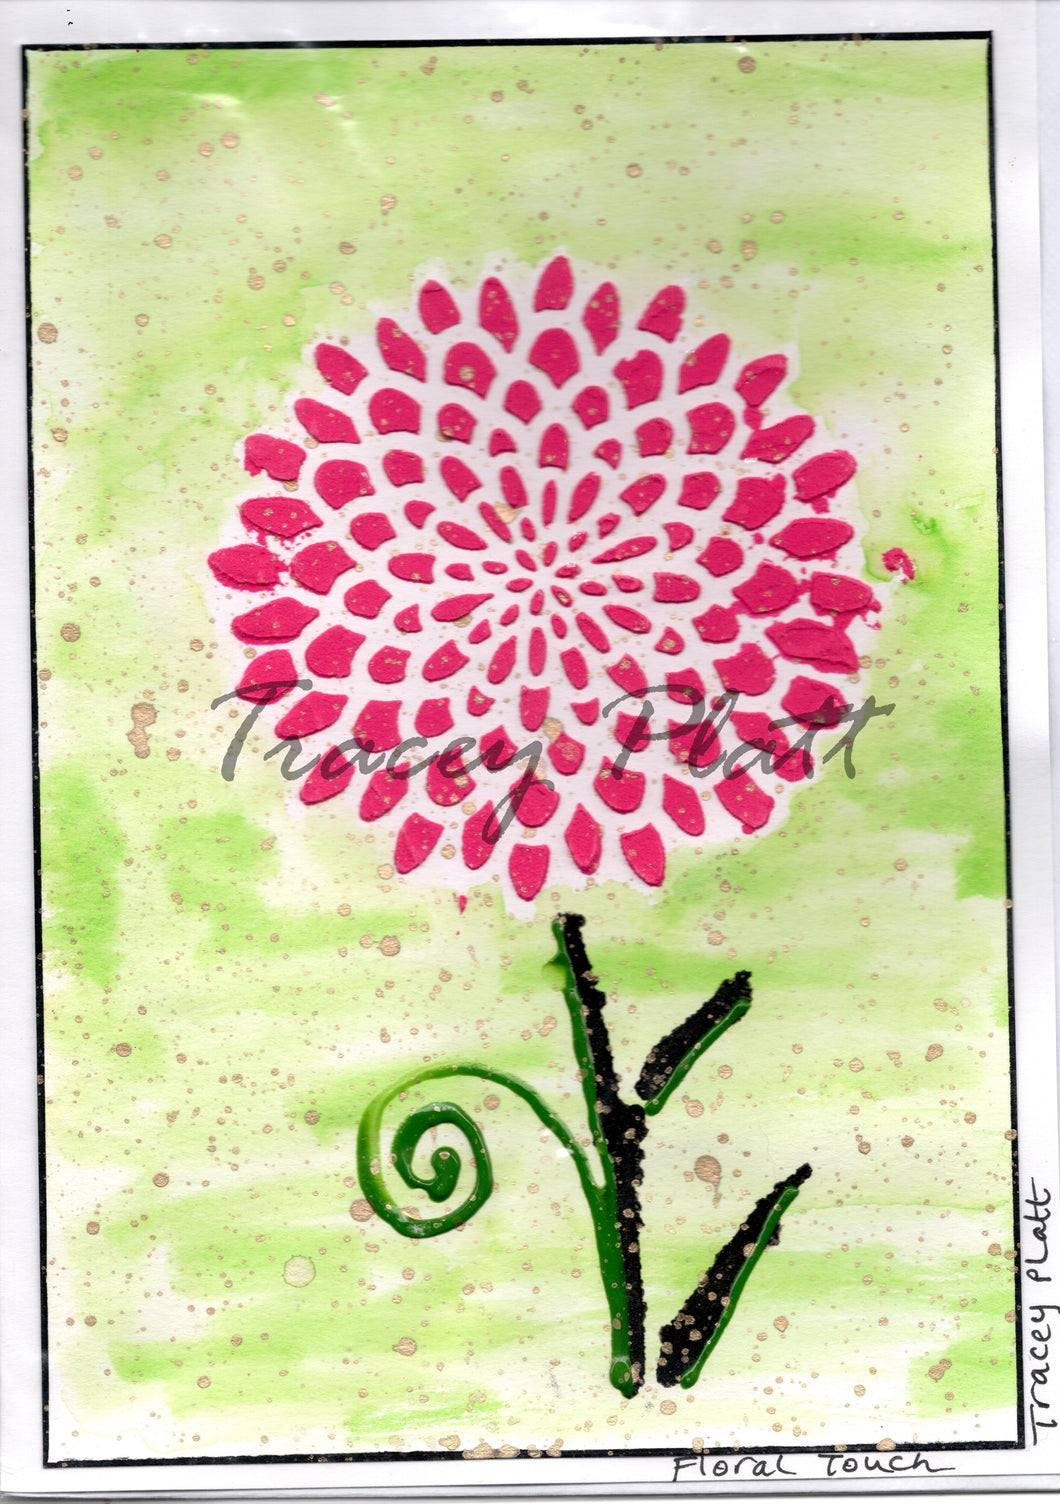 ORIGINAL MIXED MEDIA ART CARD - Floral Touch